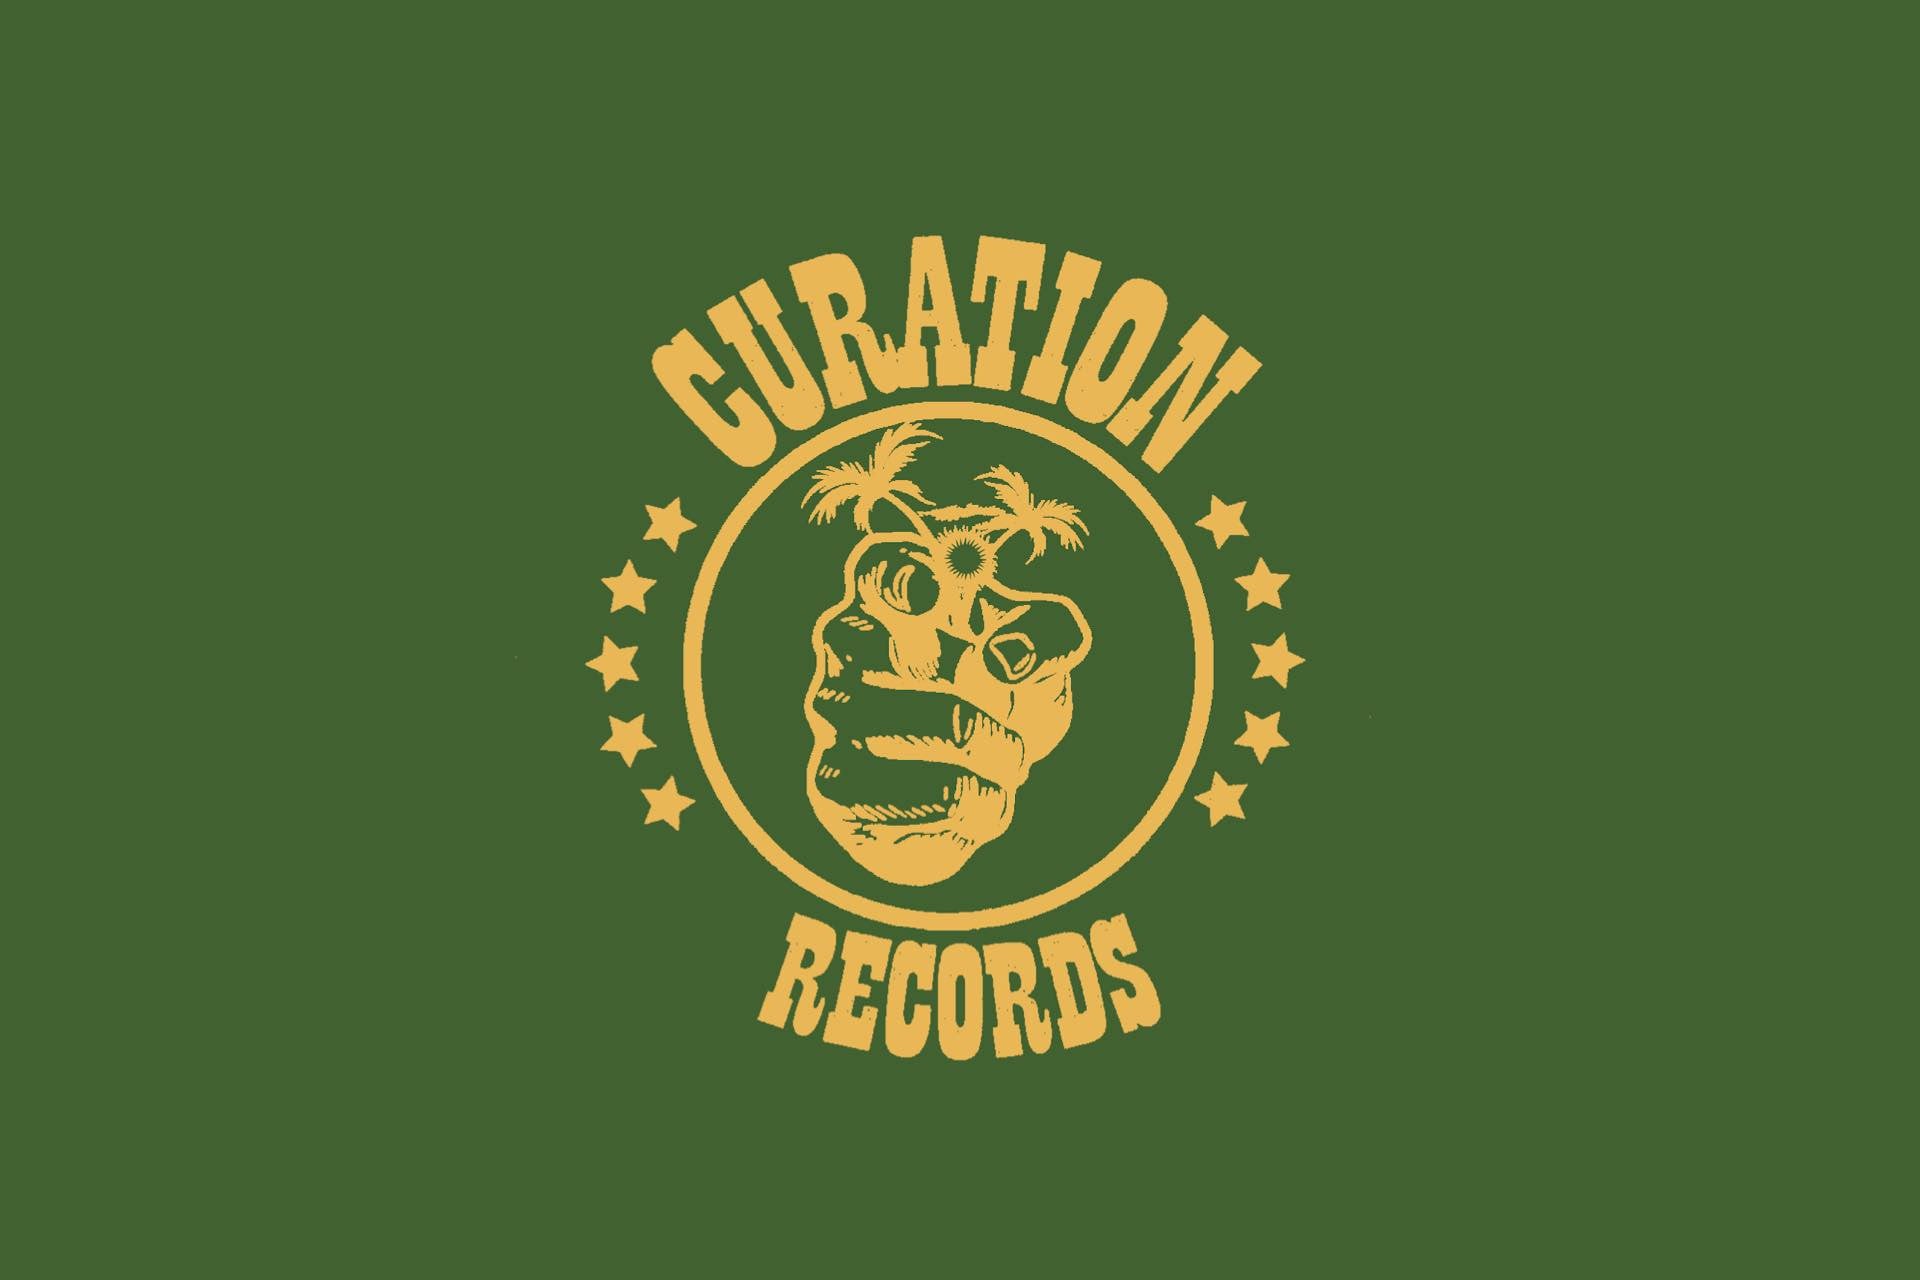 Welcome to Curation Records!